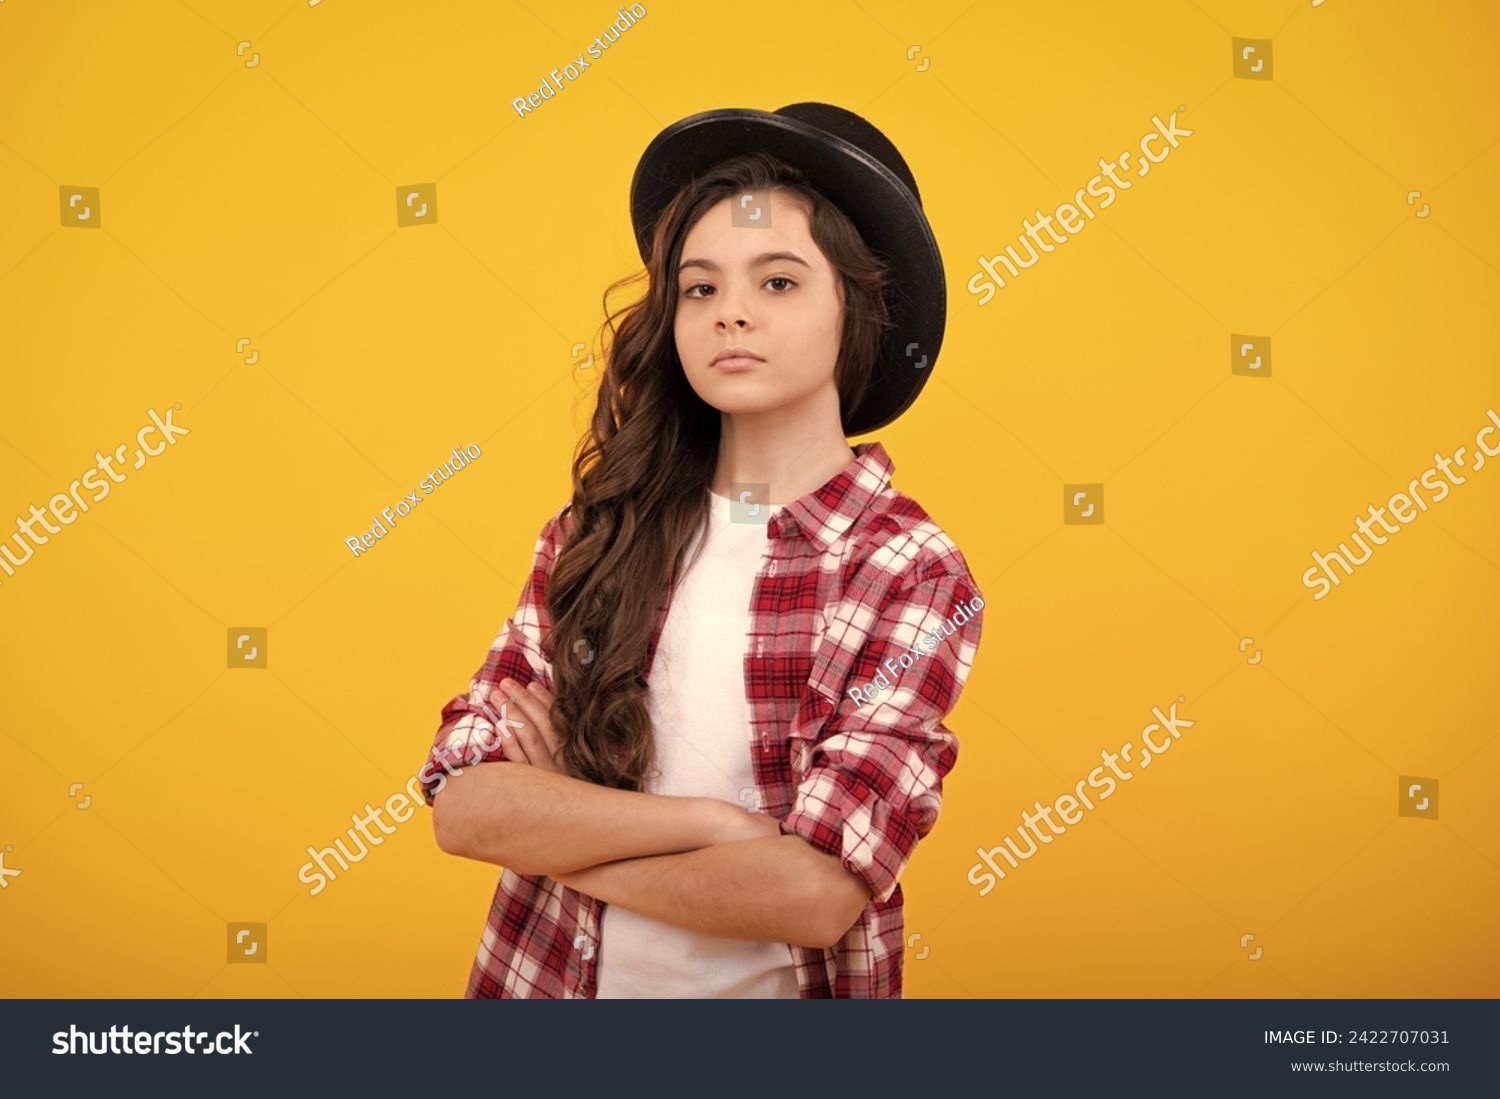 Child girl in magician hat, cylinder hat isolated on yellow background. Headwear. Clothes accessories. Fashion headwear for gentlemen in vintage style, old classic cylinder. #2422707031